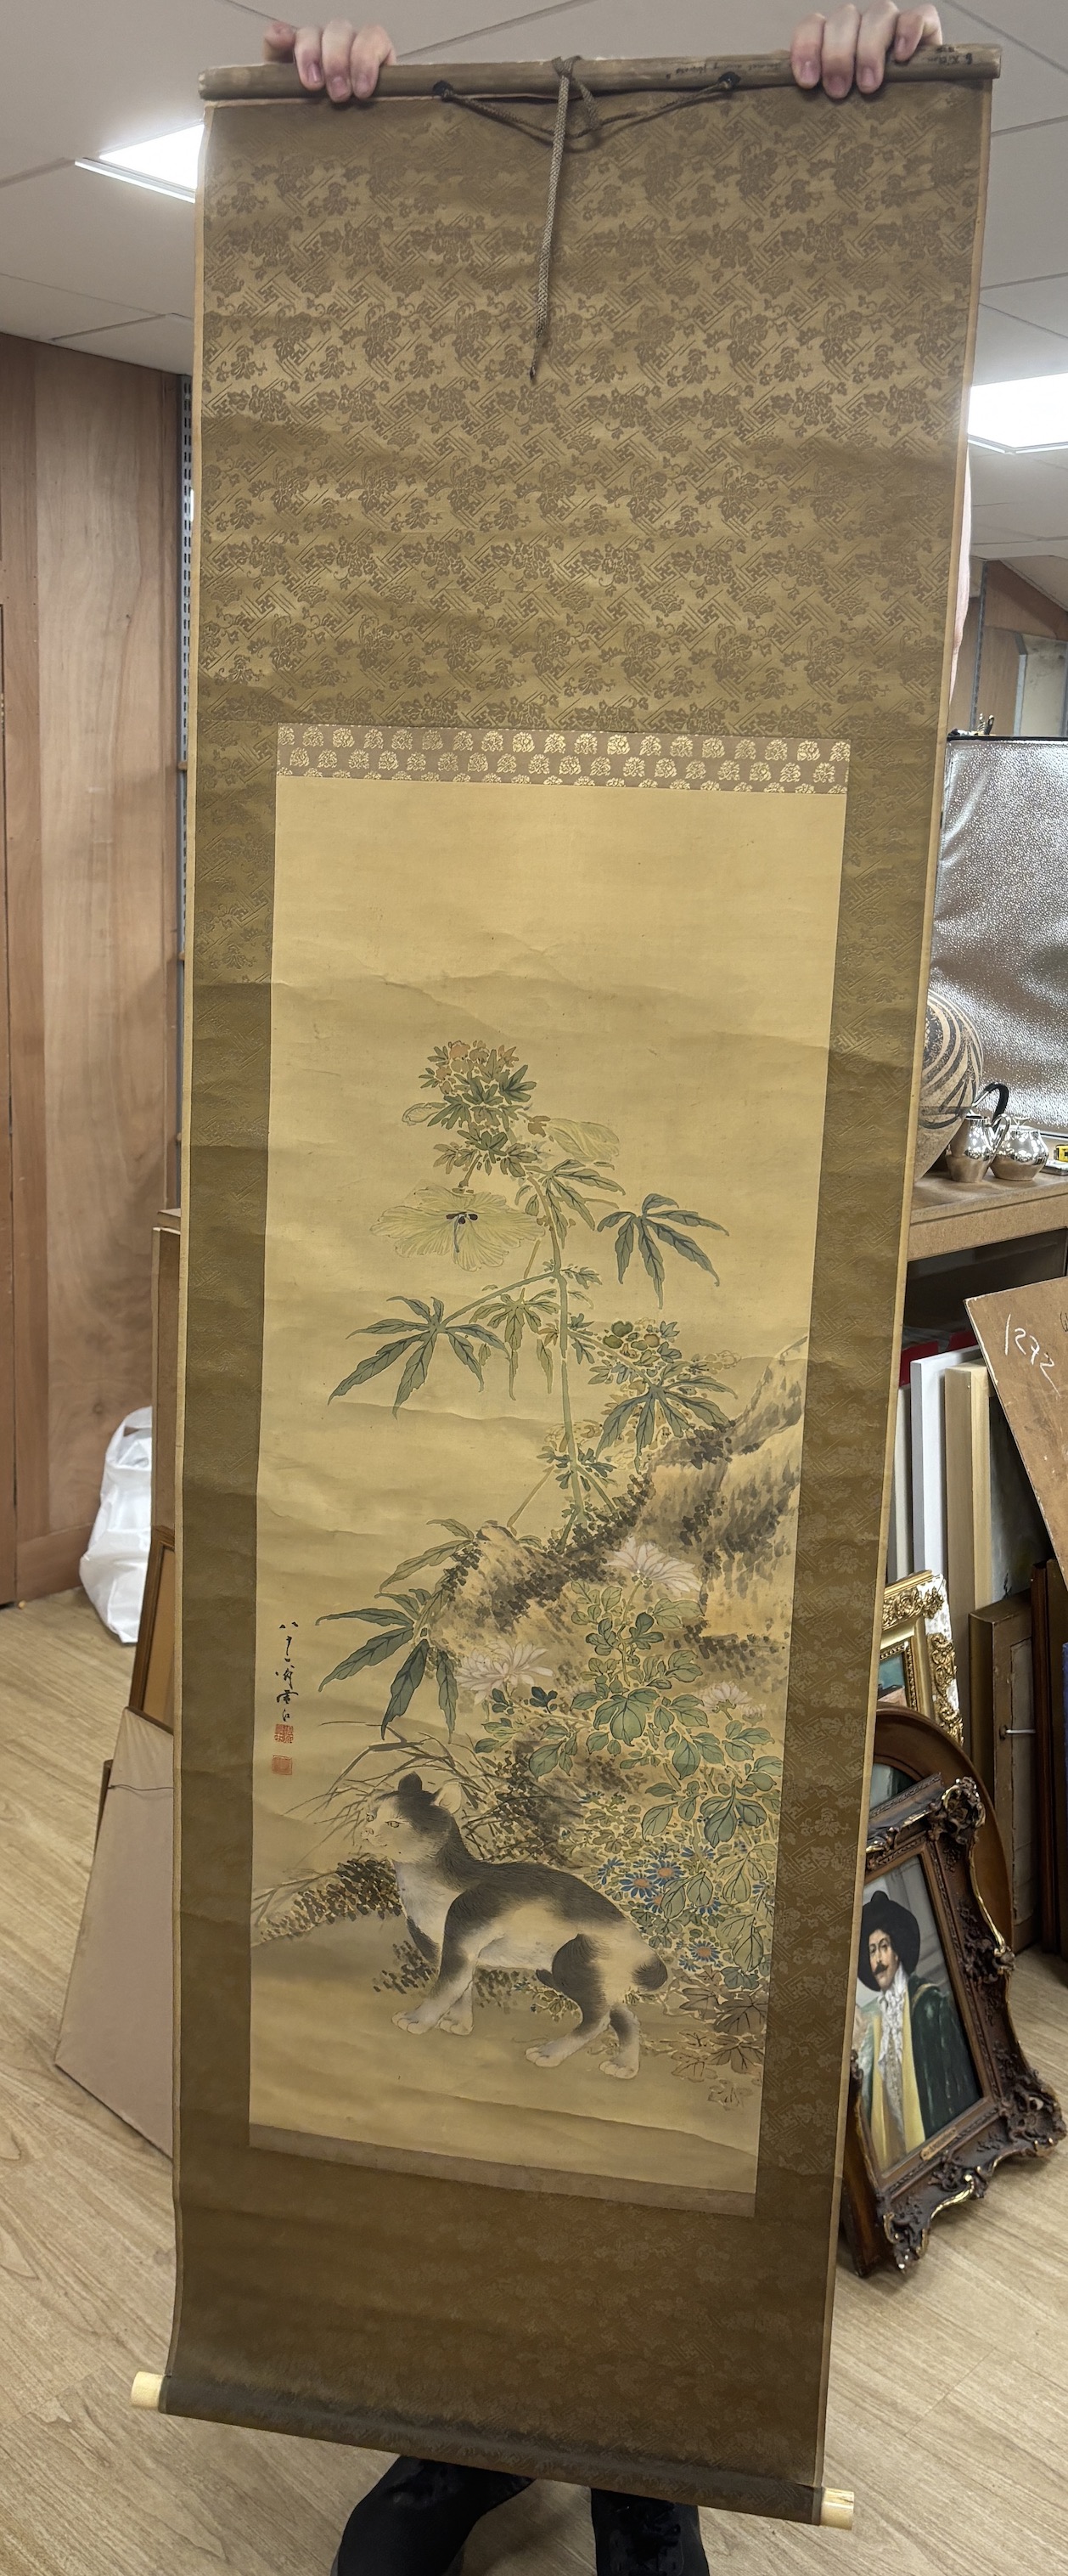 Sekko Matsudaira, Japanese watercolour scroll, domestic animal amongst flowers, housed in a wooden case